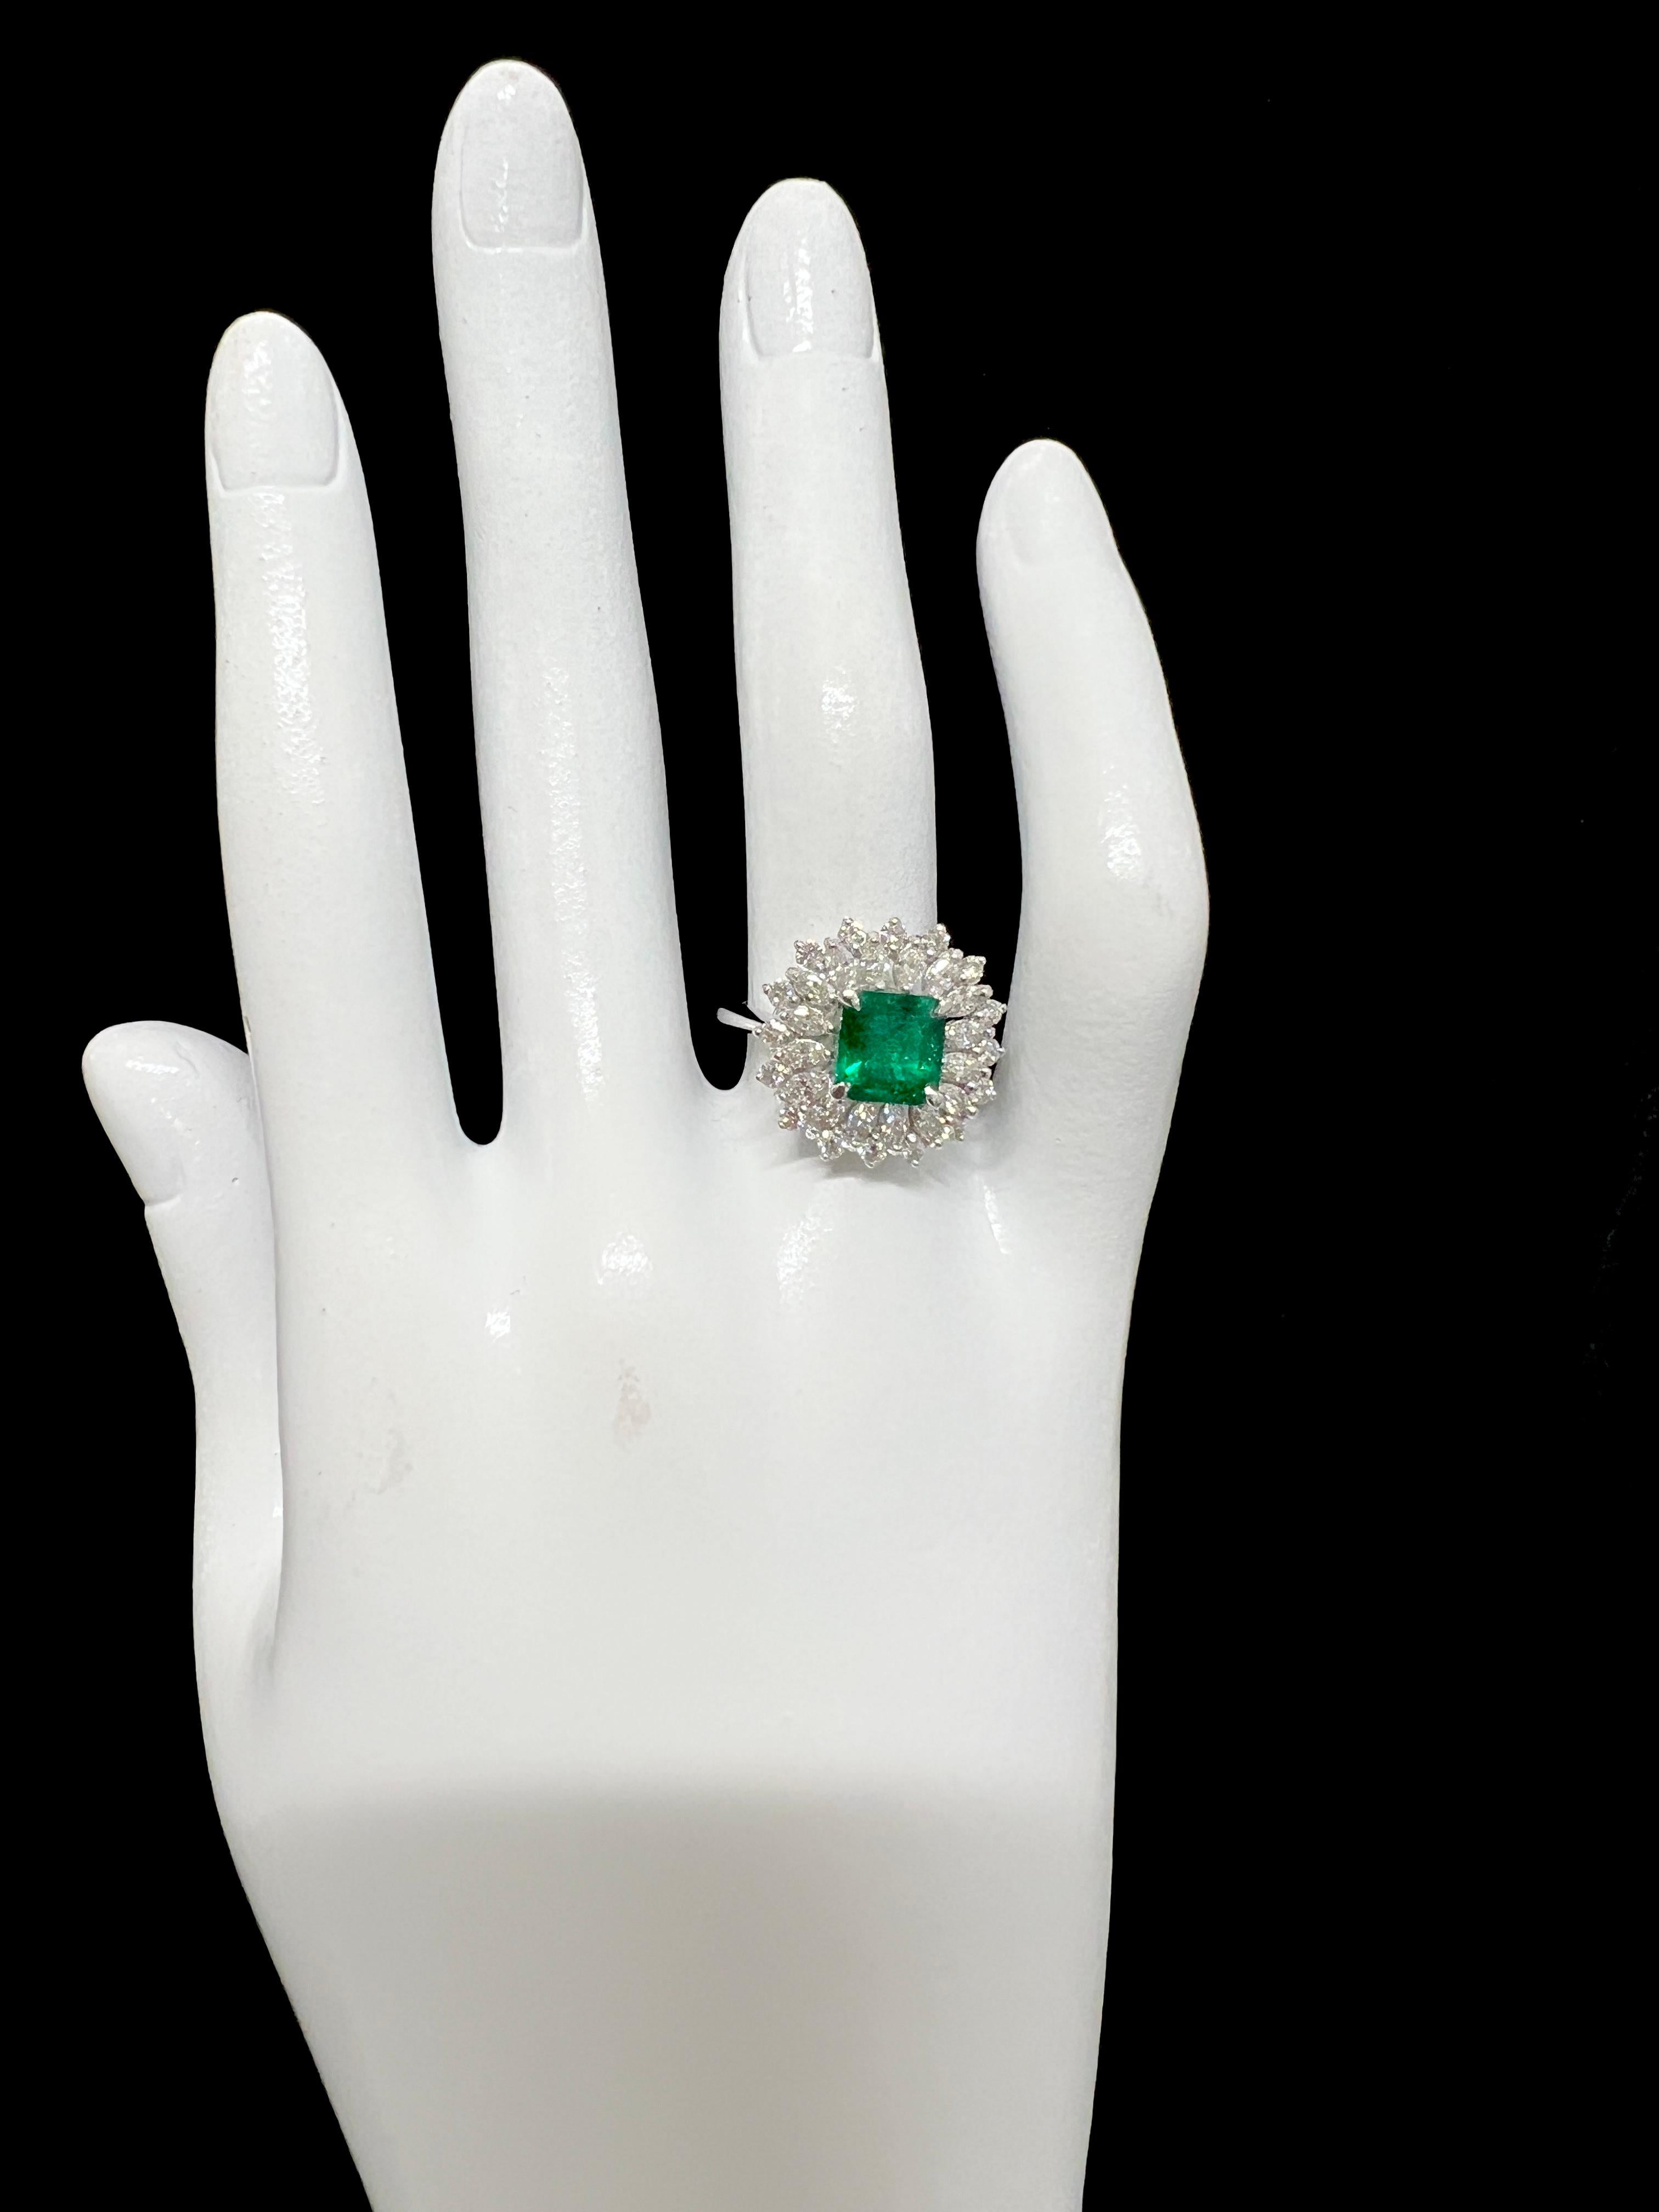 Emerald Cut 1.51 Carat Vivid Green, Colombian Emerald and Diamond Ring Set in Platinum For Sale